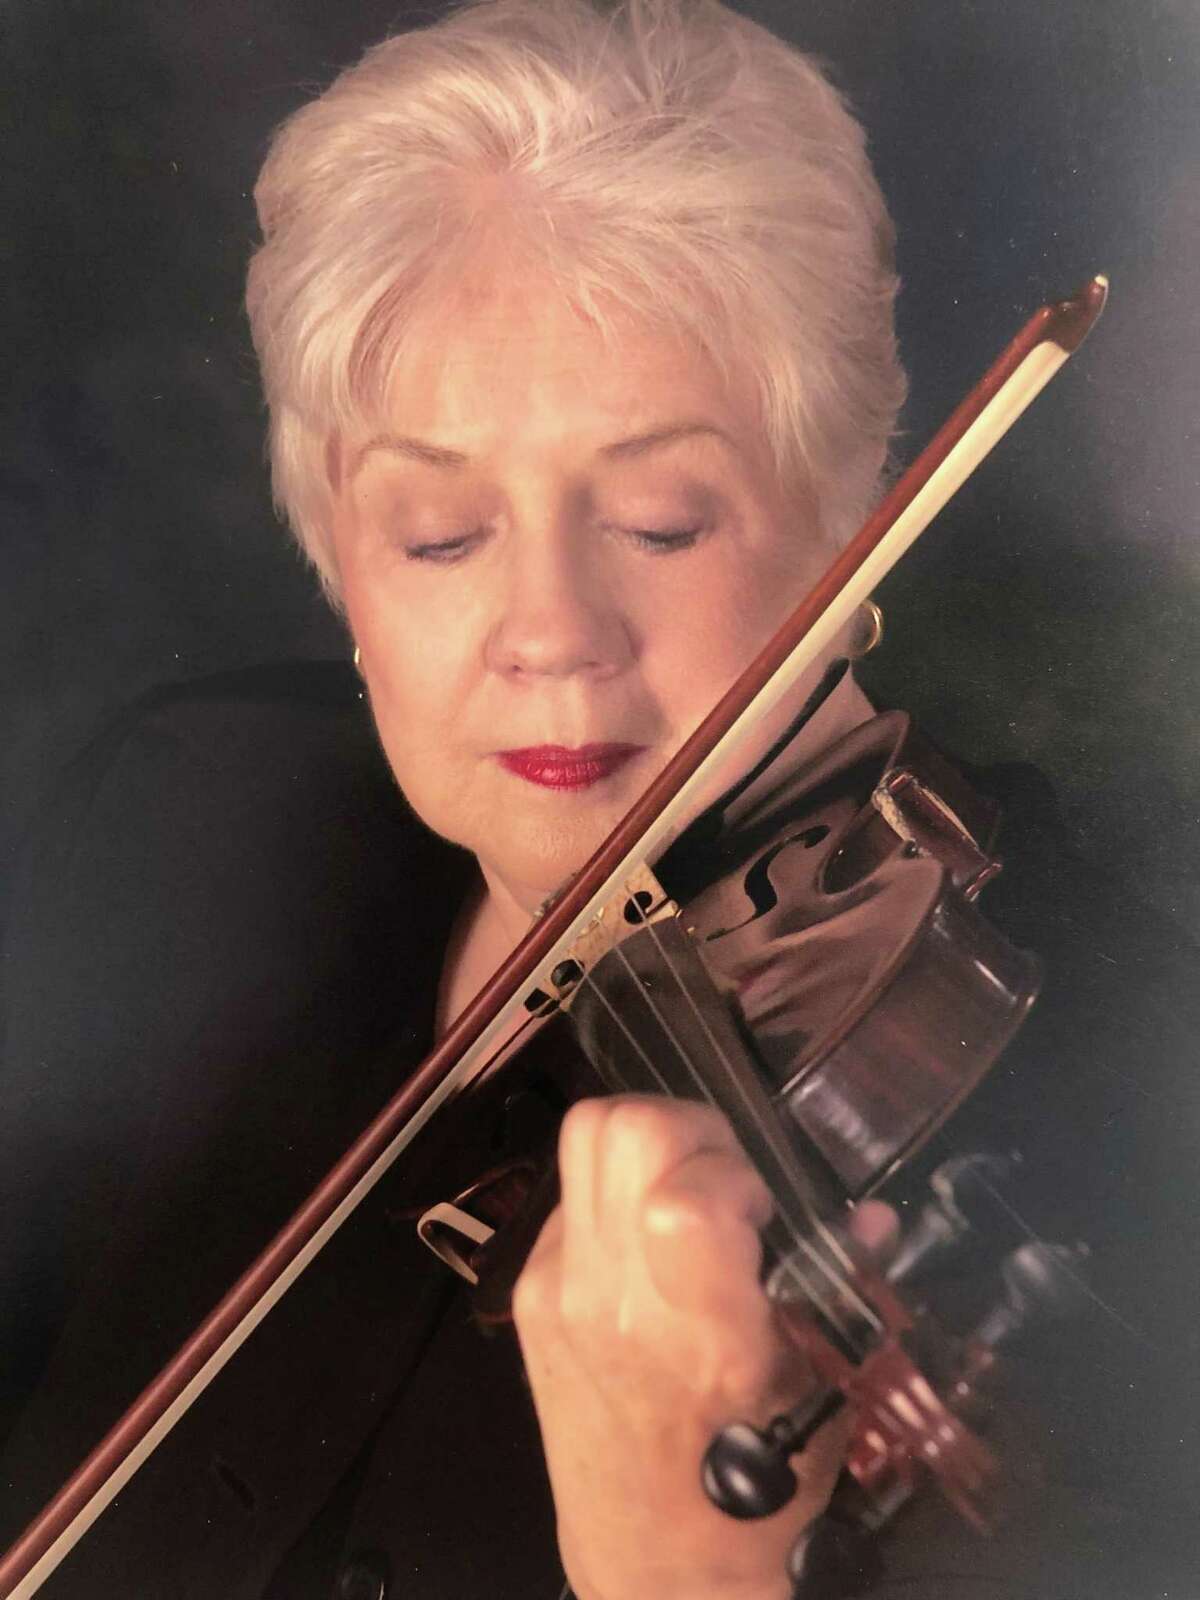 The Conroe Symphony Orchestra will celebrate the legacy of longtime player and founding member Mary Curtis Taylor at the orchestra’s Oct. 9 concert. Taylor died on Sept. 3.